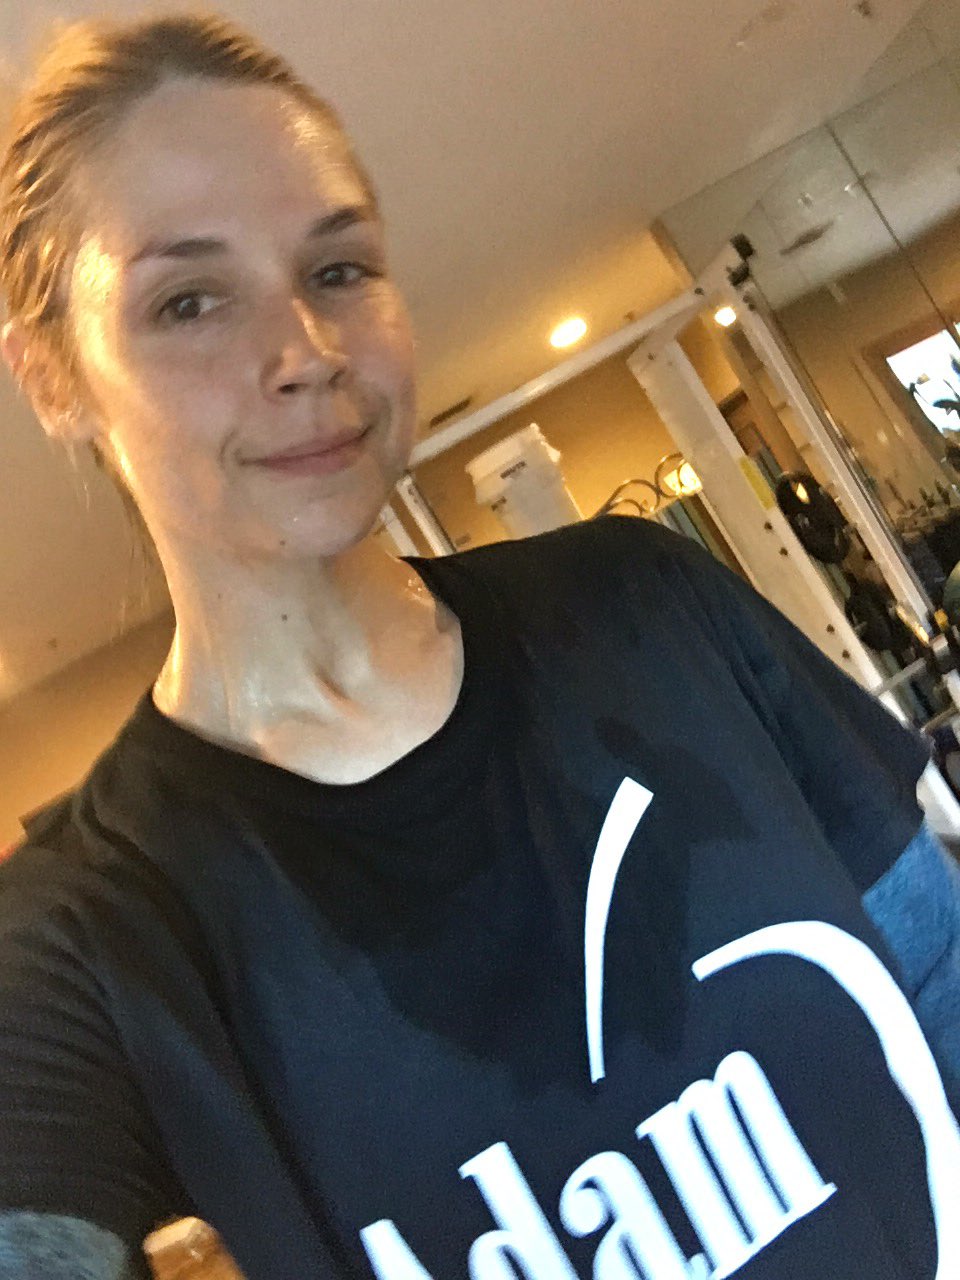 Sarah Vandella On Twitter Only 45 Min Of Cardio Today Since Its 